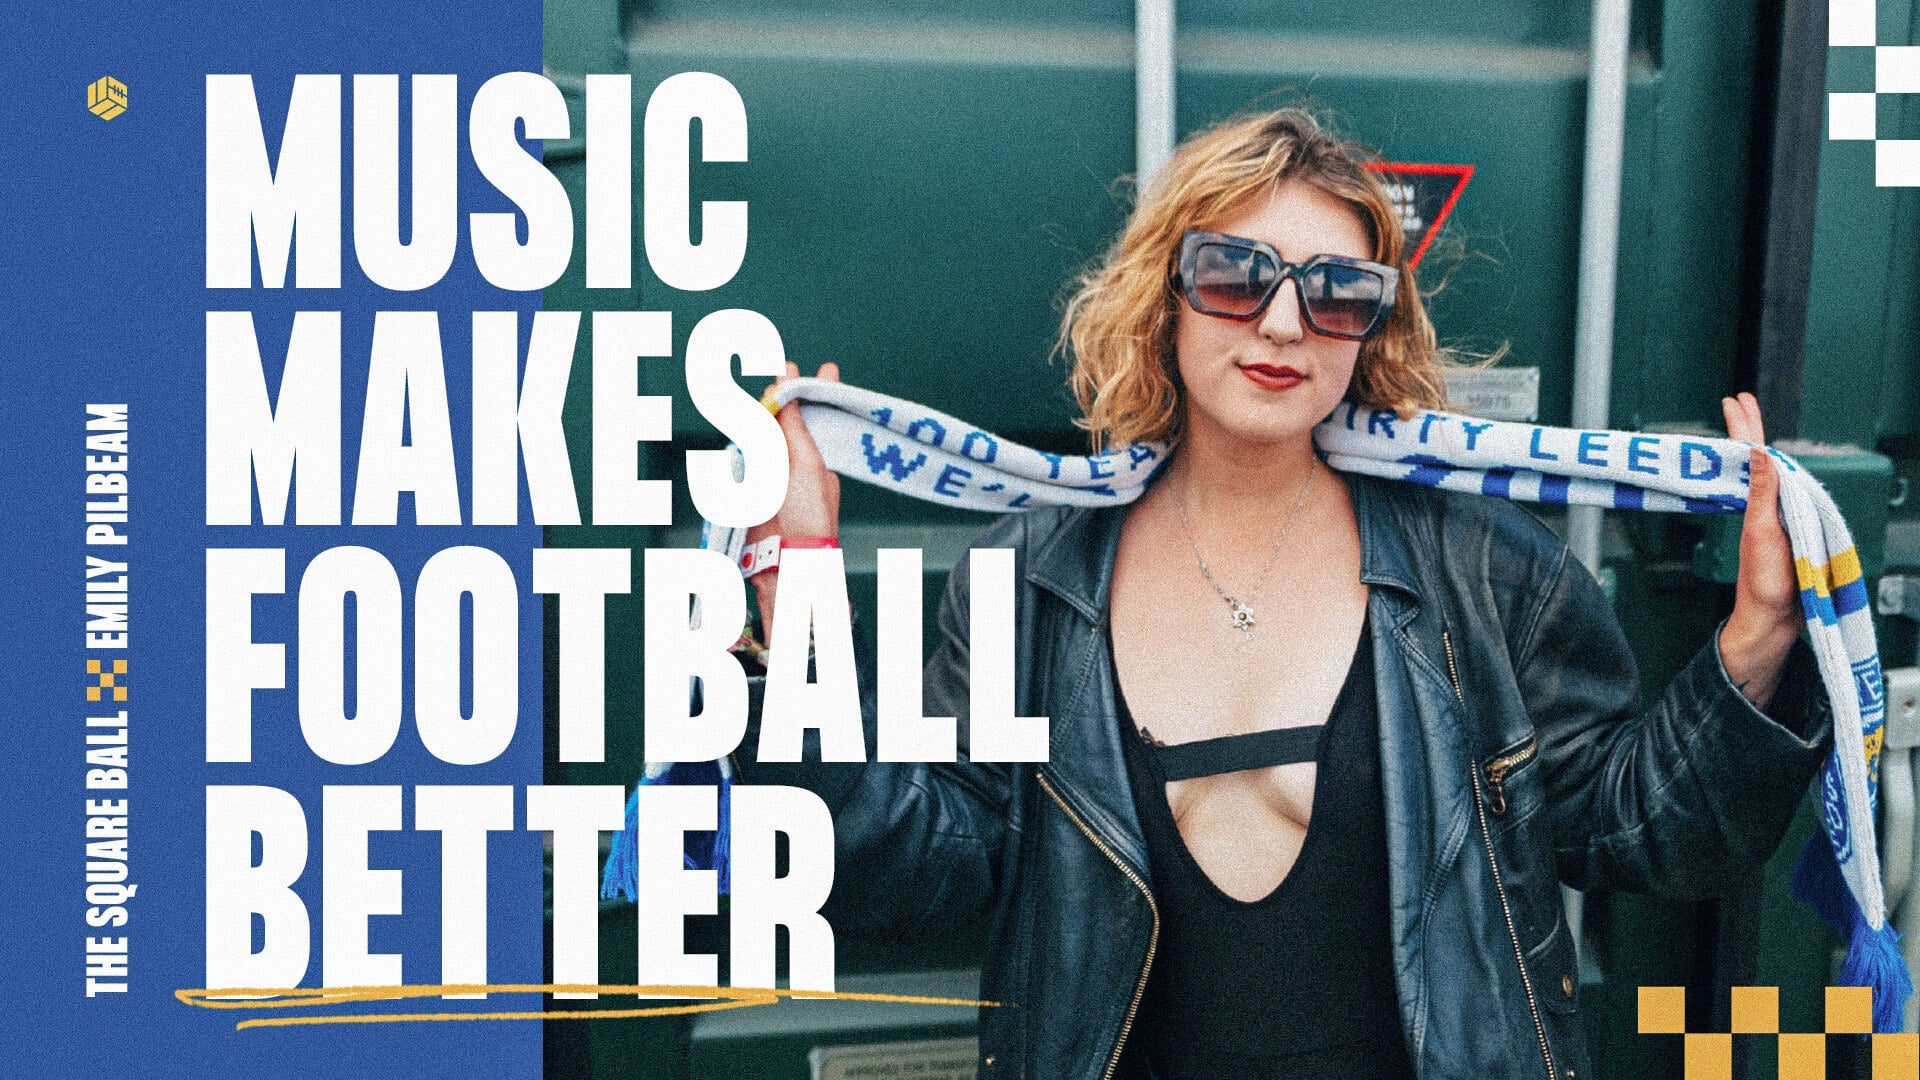 MUSIC MAKES FOOTBALL BETTER is the text, next to a photo of DJ Emily Pilbeam in shades and a Leeds scarf